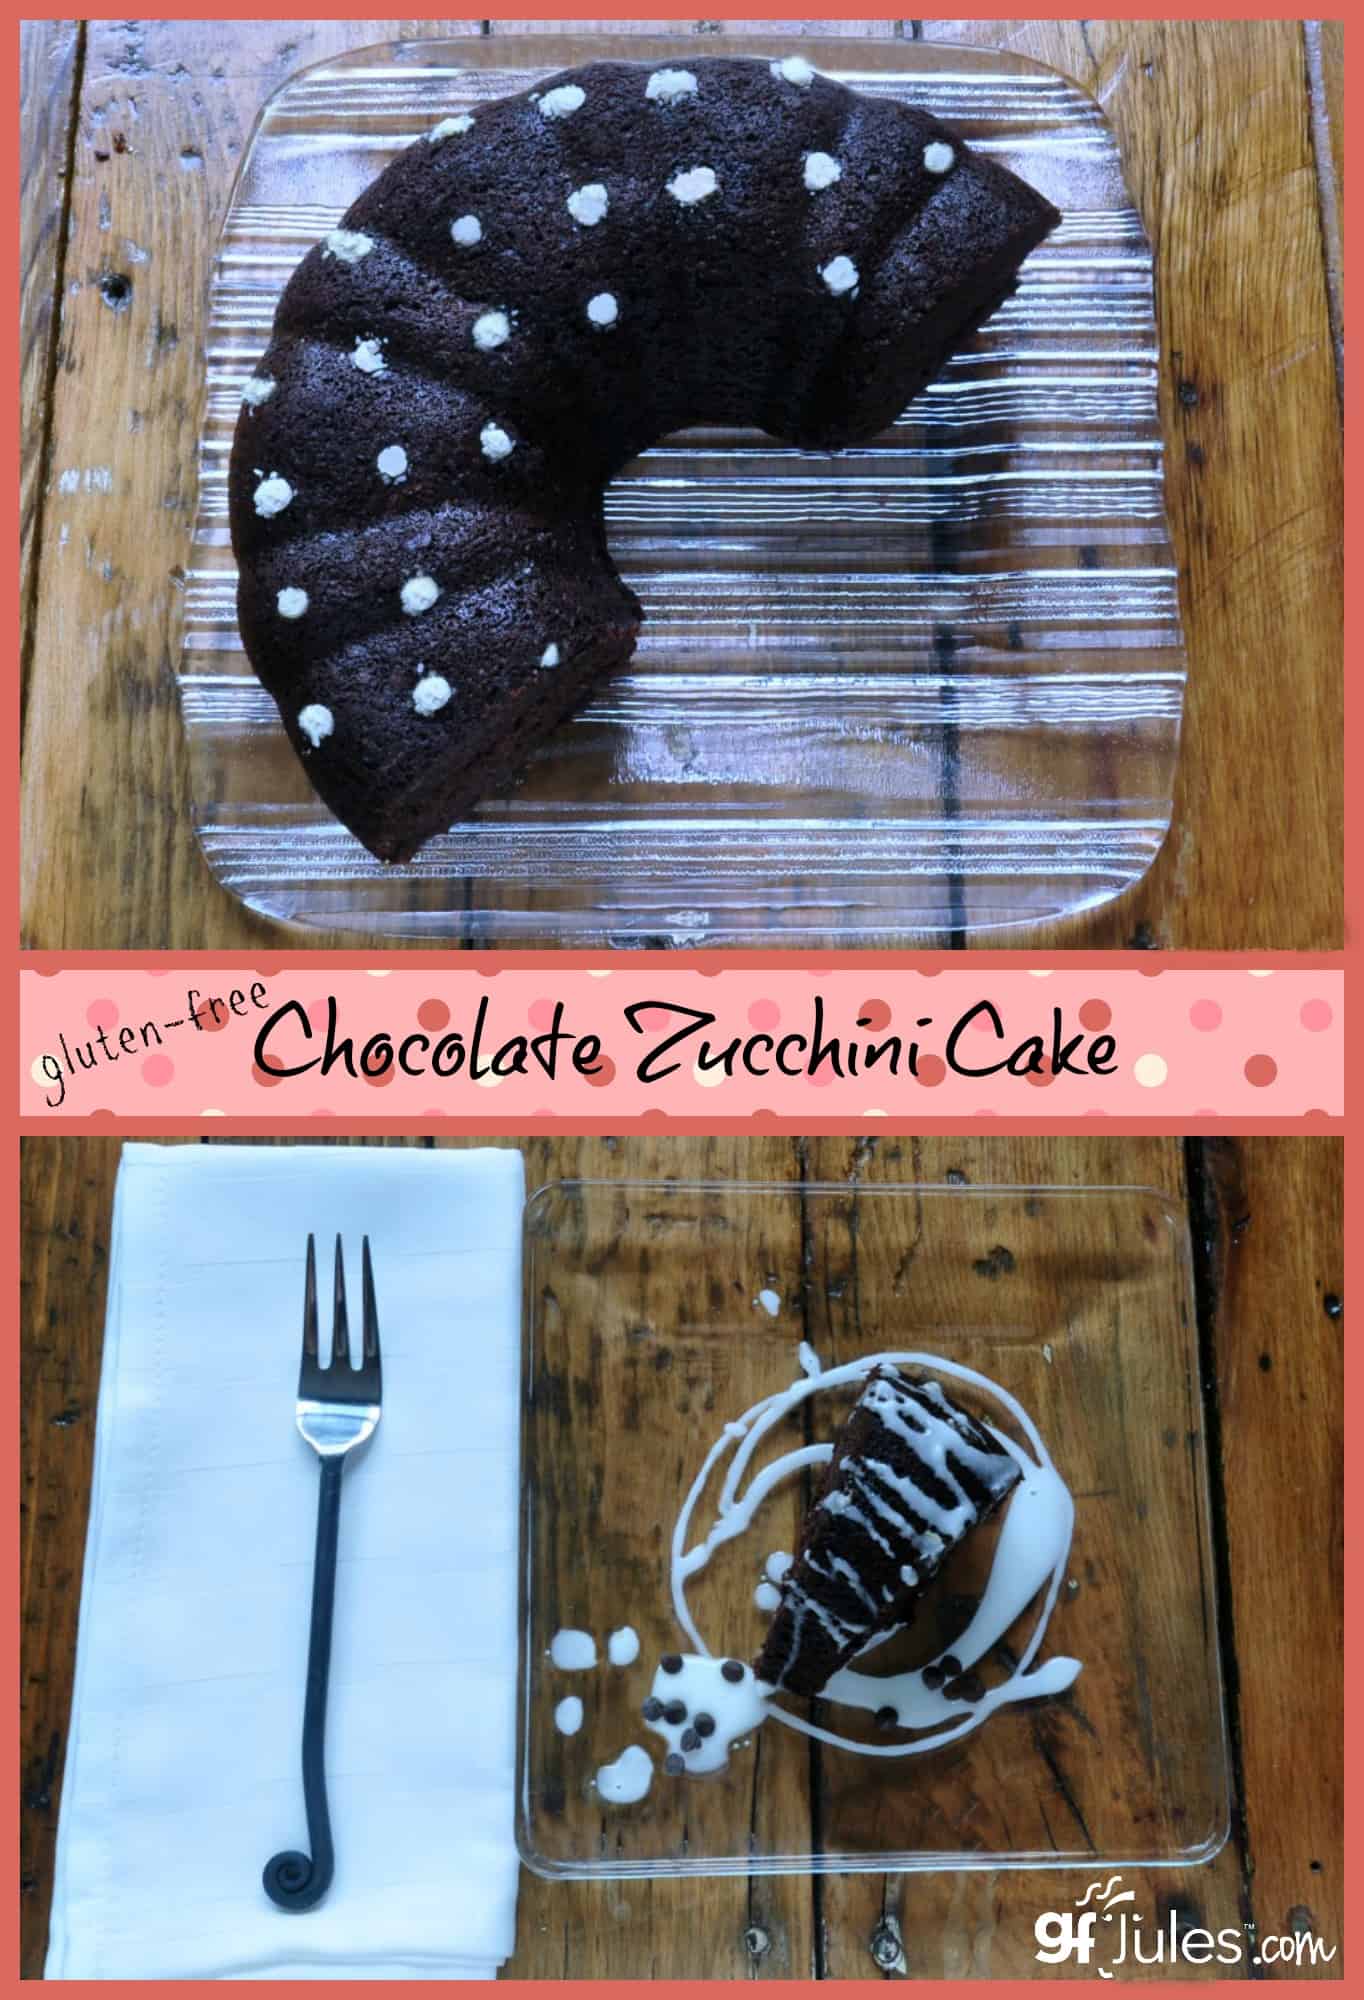 You might not think that zucchini and chocolate could marry so well, but just wait til you taste this amazing gluten-free cake! It's a match made in heaven! Gluten Free Chocolate Zucchini Cake-gfjules.com